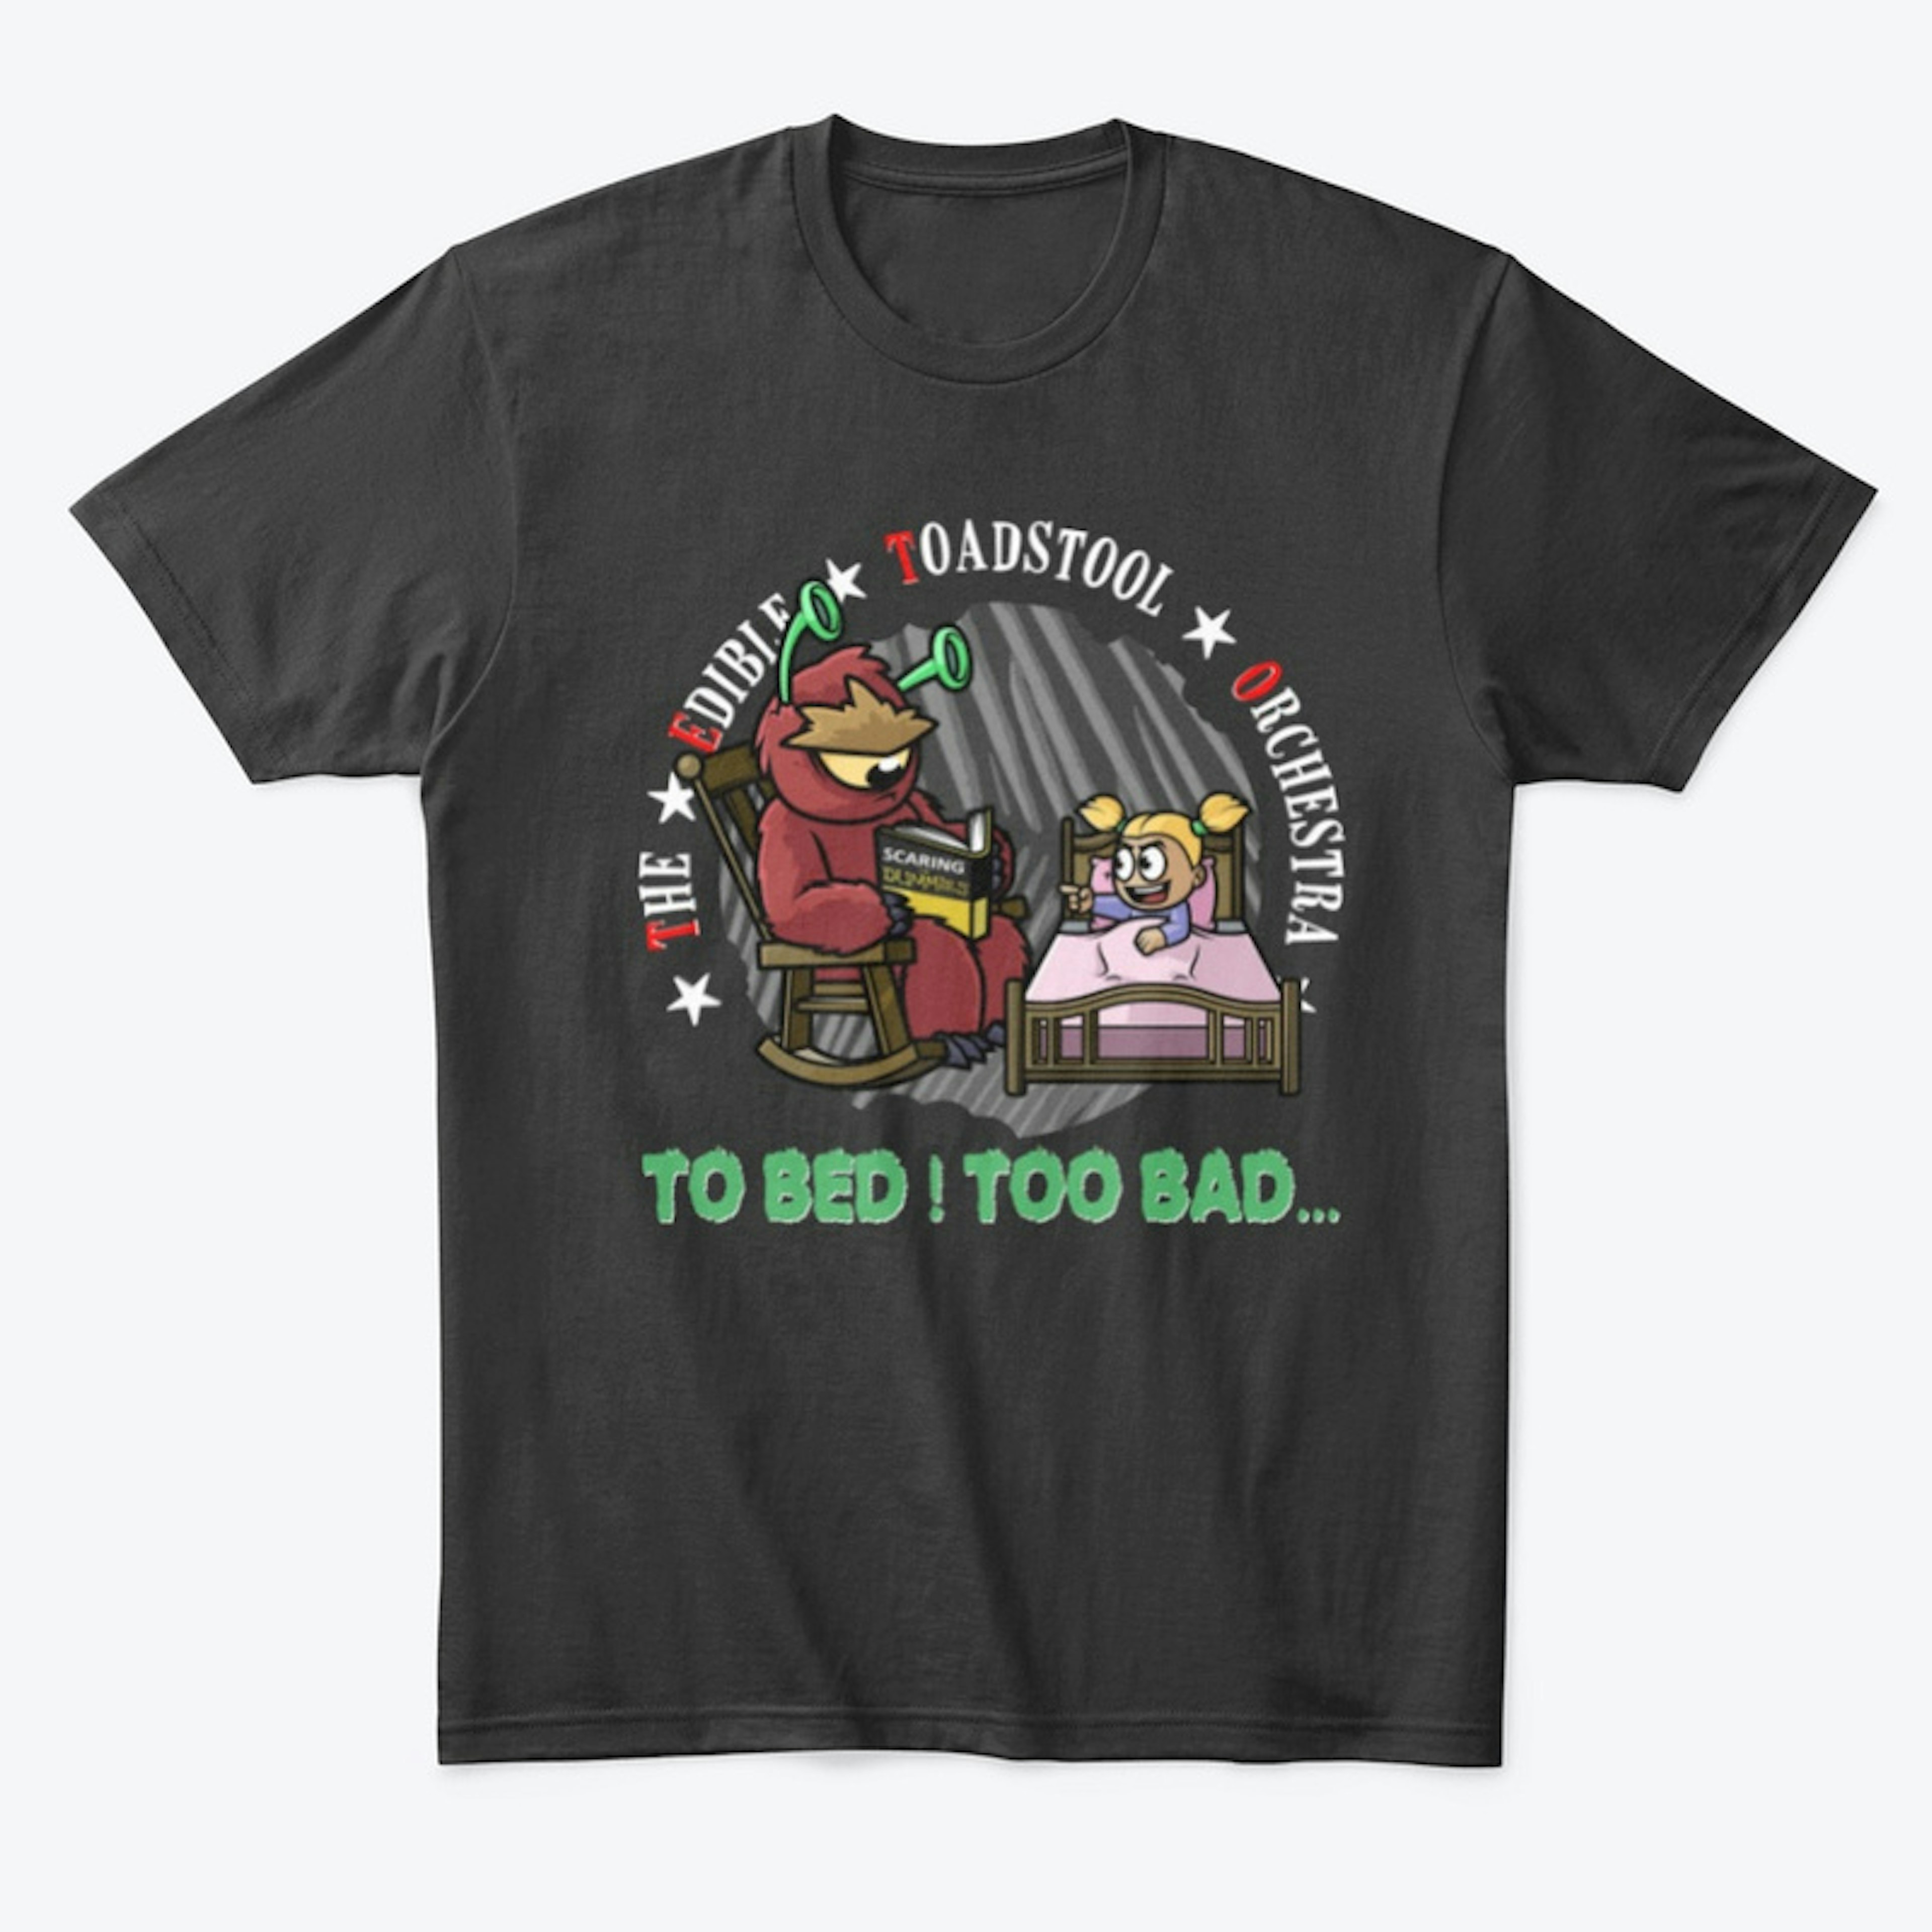 TO BED ! TOO BAD... - Man Shirt